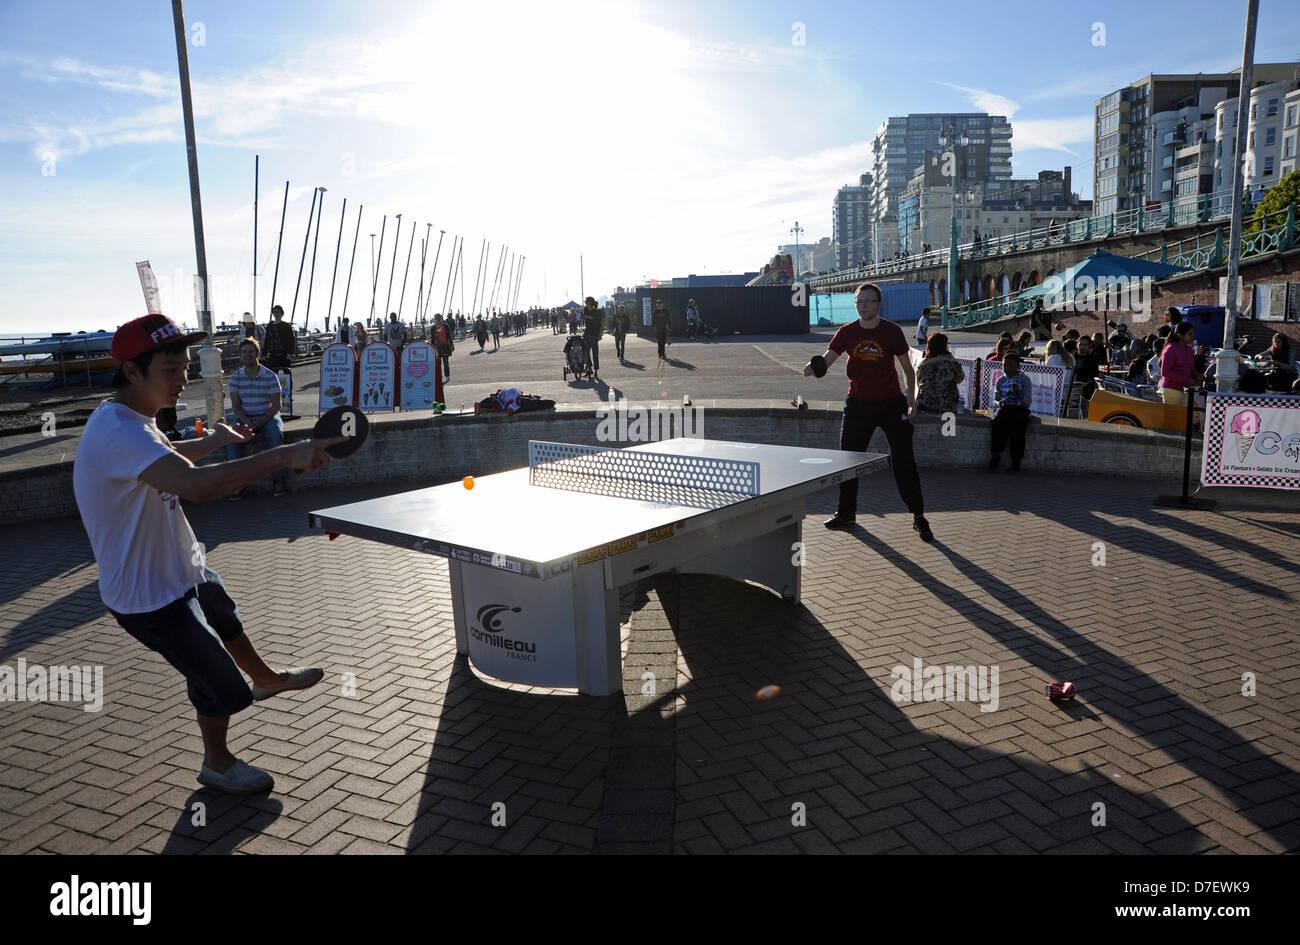 Brighton UK 6th May 2013 - Playing table tennis as the sun goes down on Brighton seafront after a long hot day on during the May Bank Holiday Monday  Photograph taken by Simon Dack/Alamy Live News Stock Photo